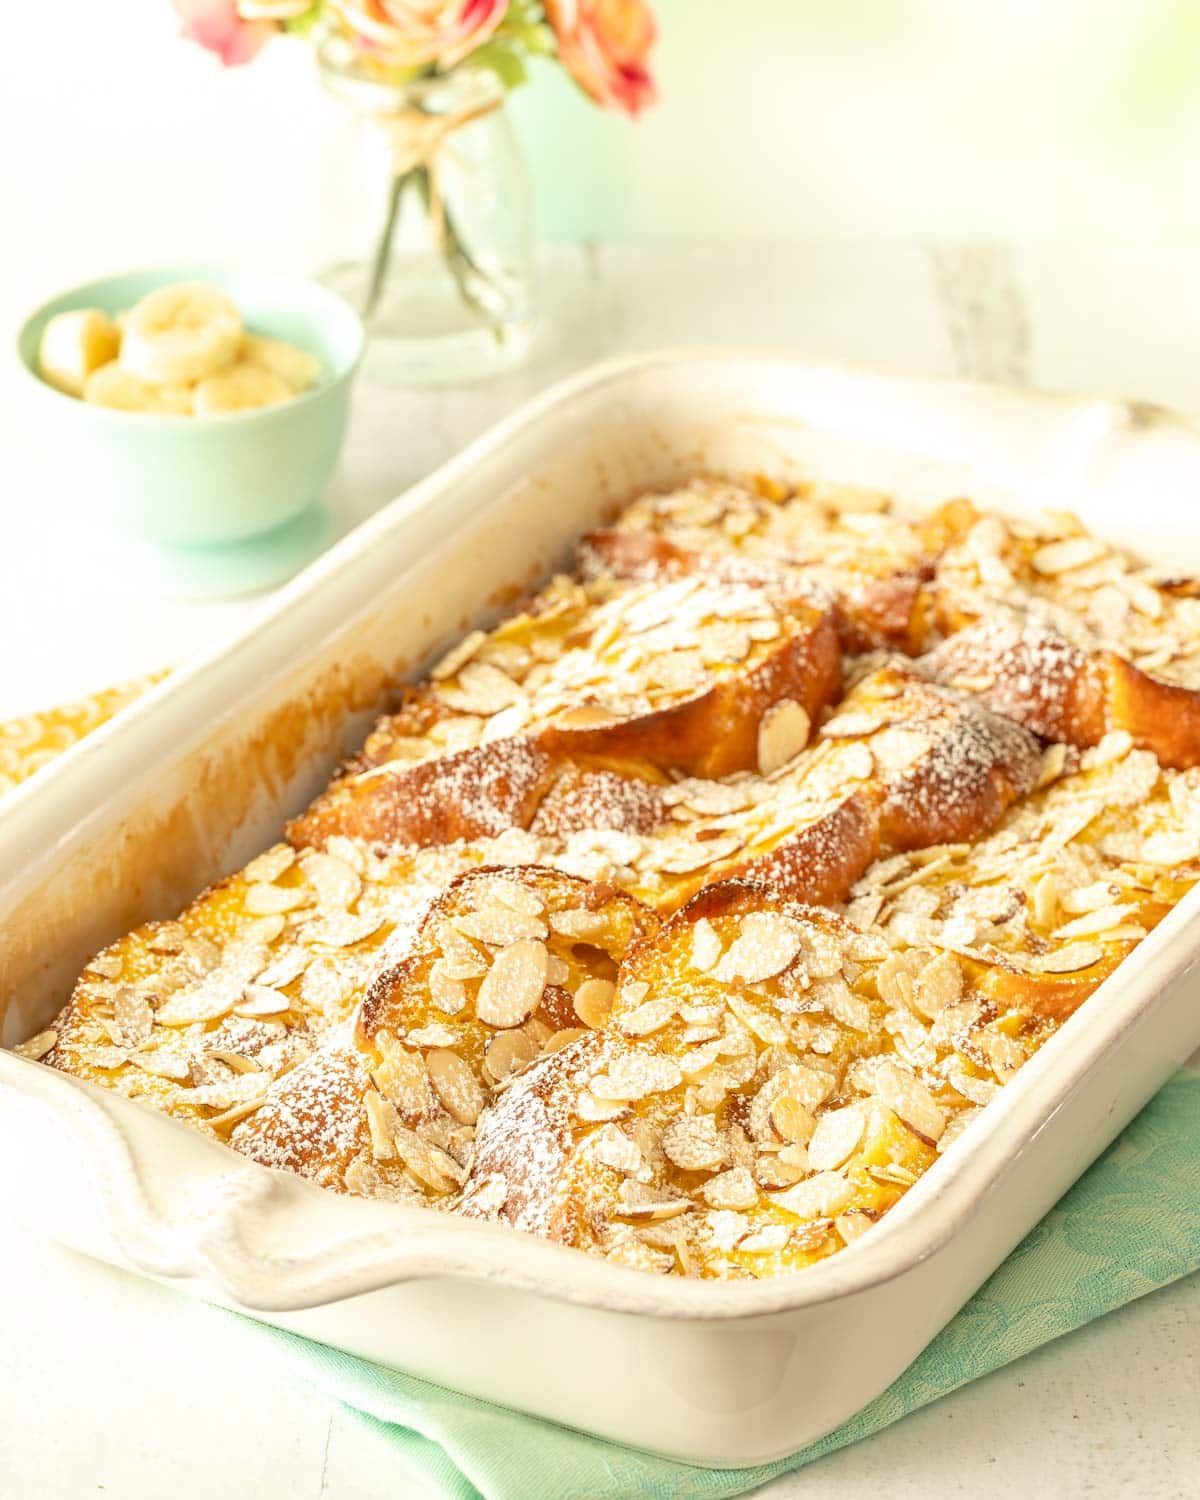 white casserole dish holding Baked Banana French Toast, with a small dish of bananas and flowers in back